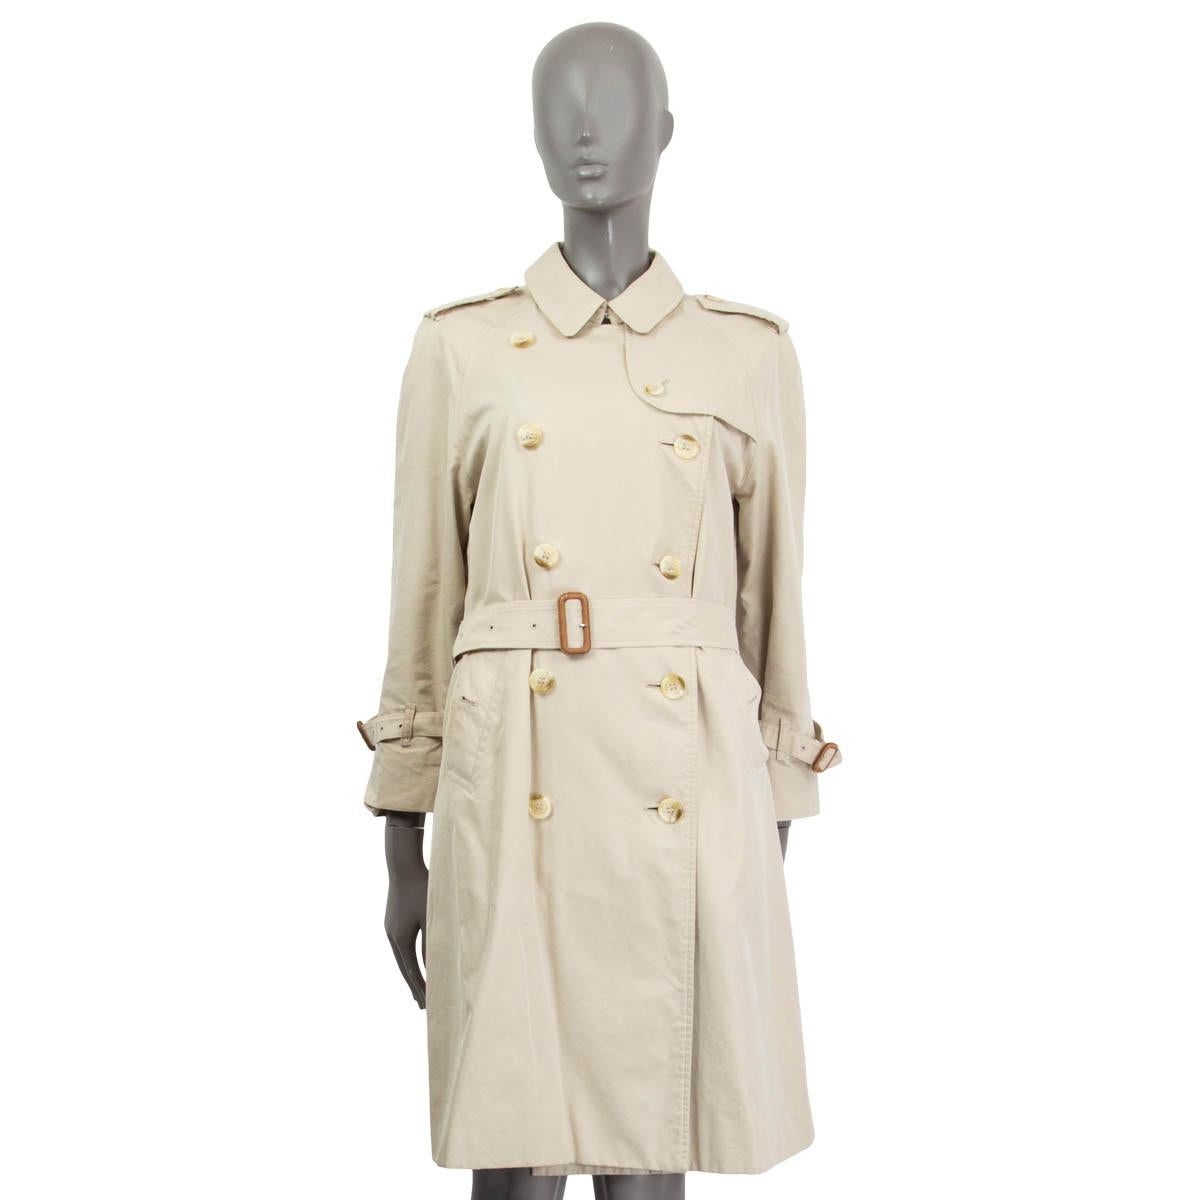 BURBERRY beige Baumwolle DOUBLE BREASTED BELTED TRENCH Mantel Jacke S - M (Beige) im Angebot